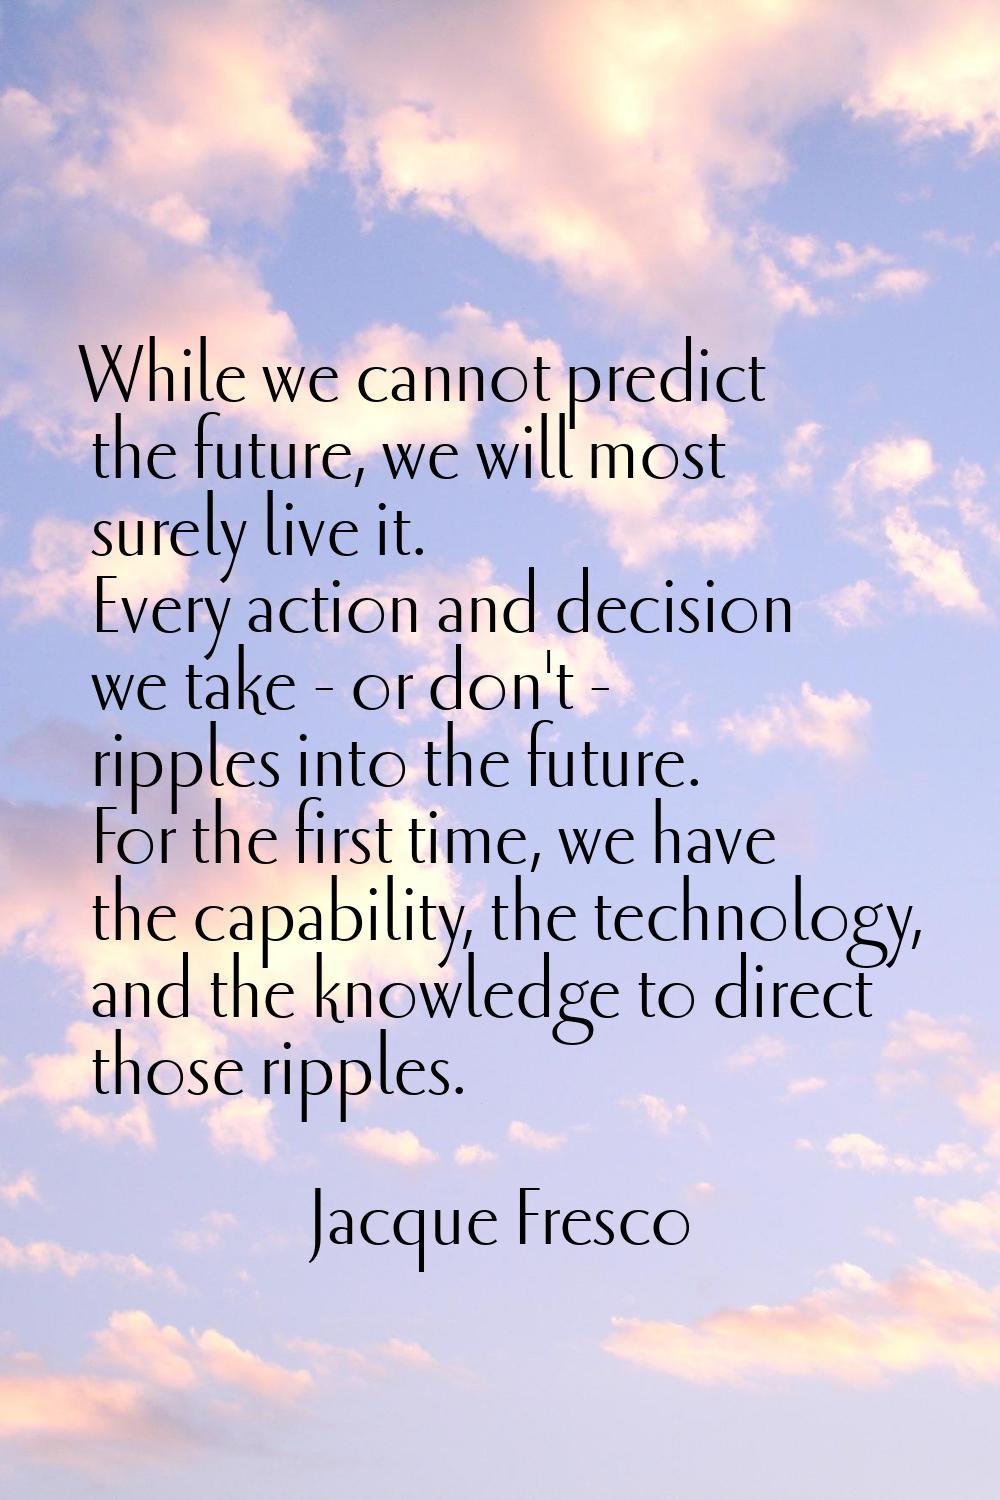 While we cannot predict the future, we will most surely live it. Every action and decision we take 